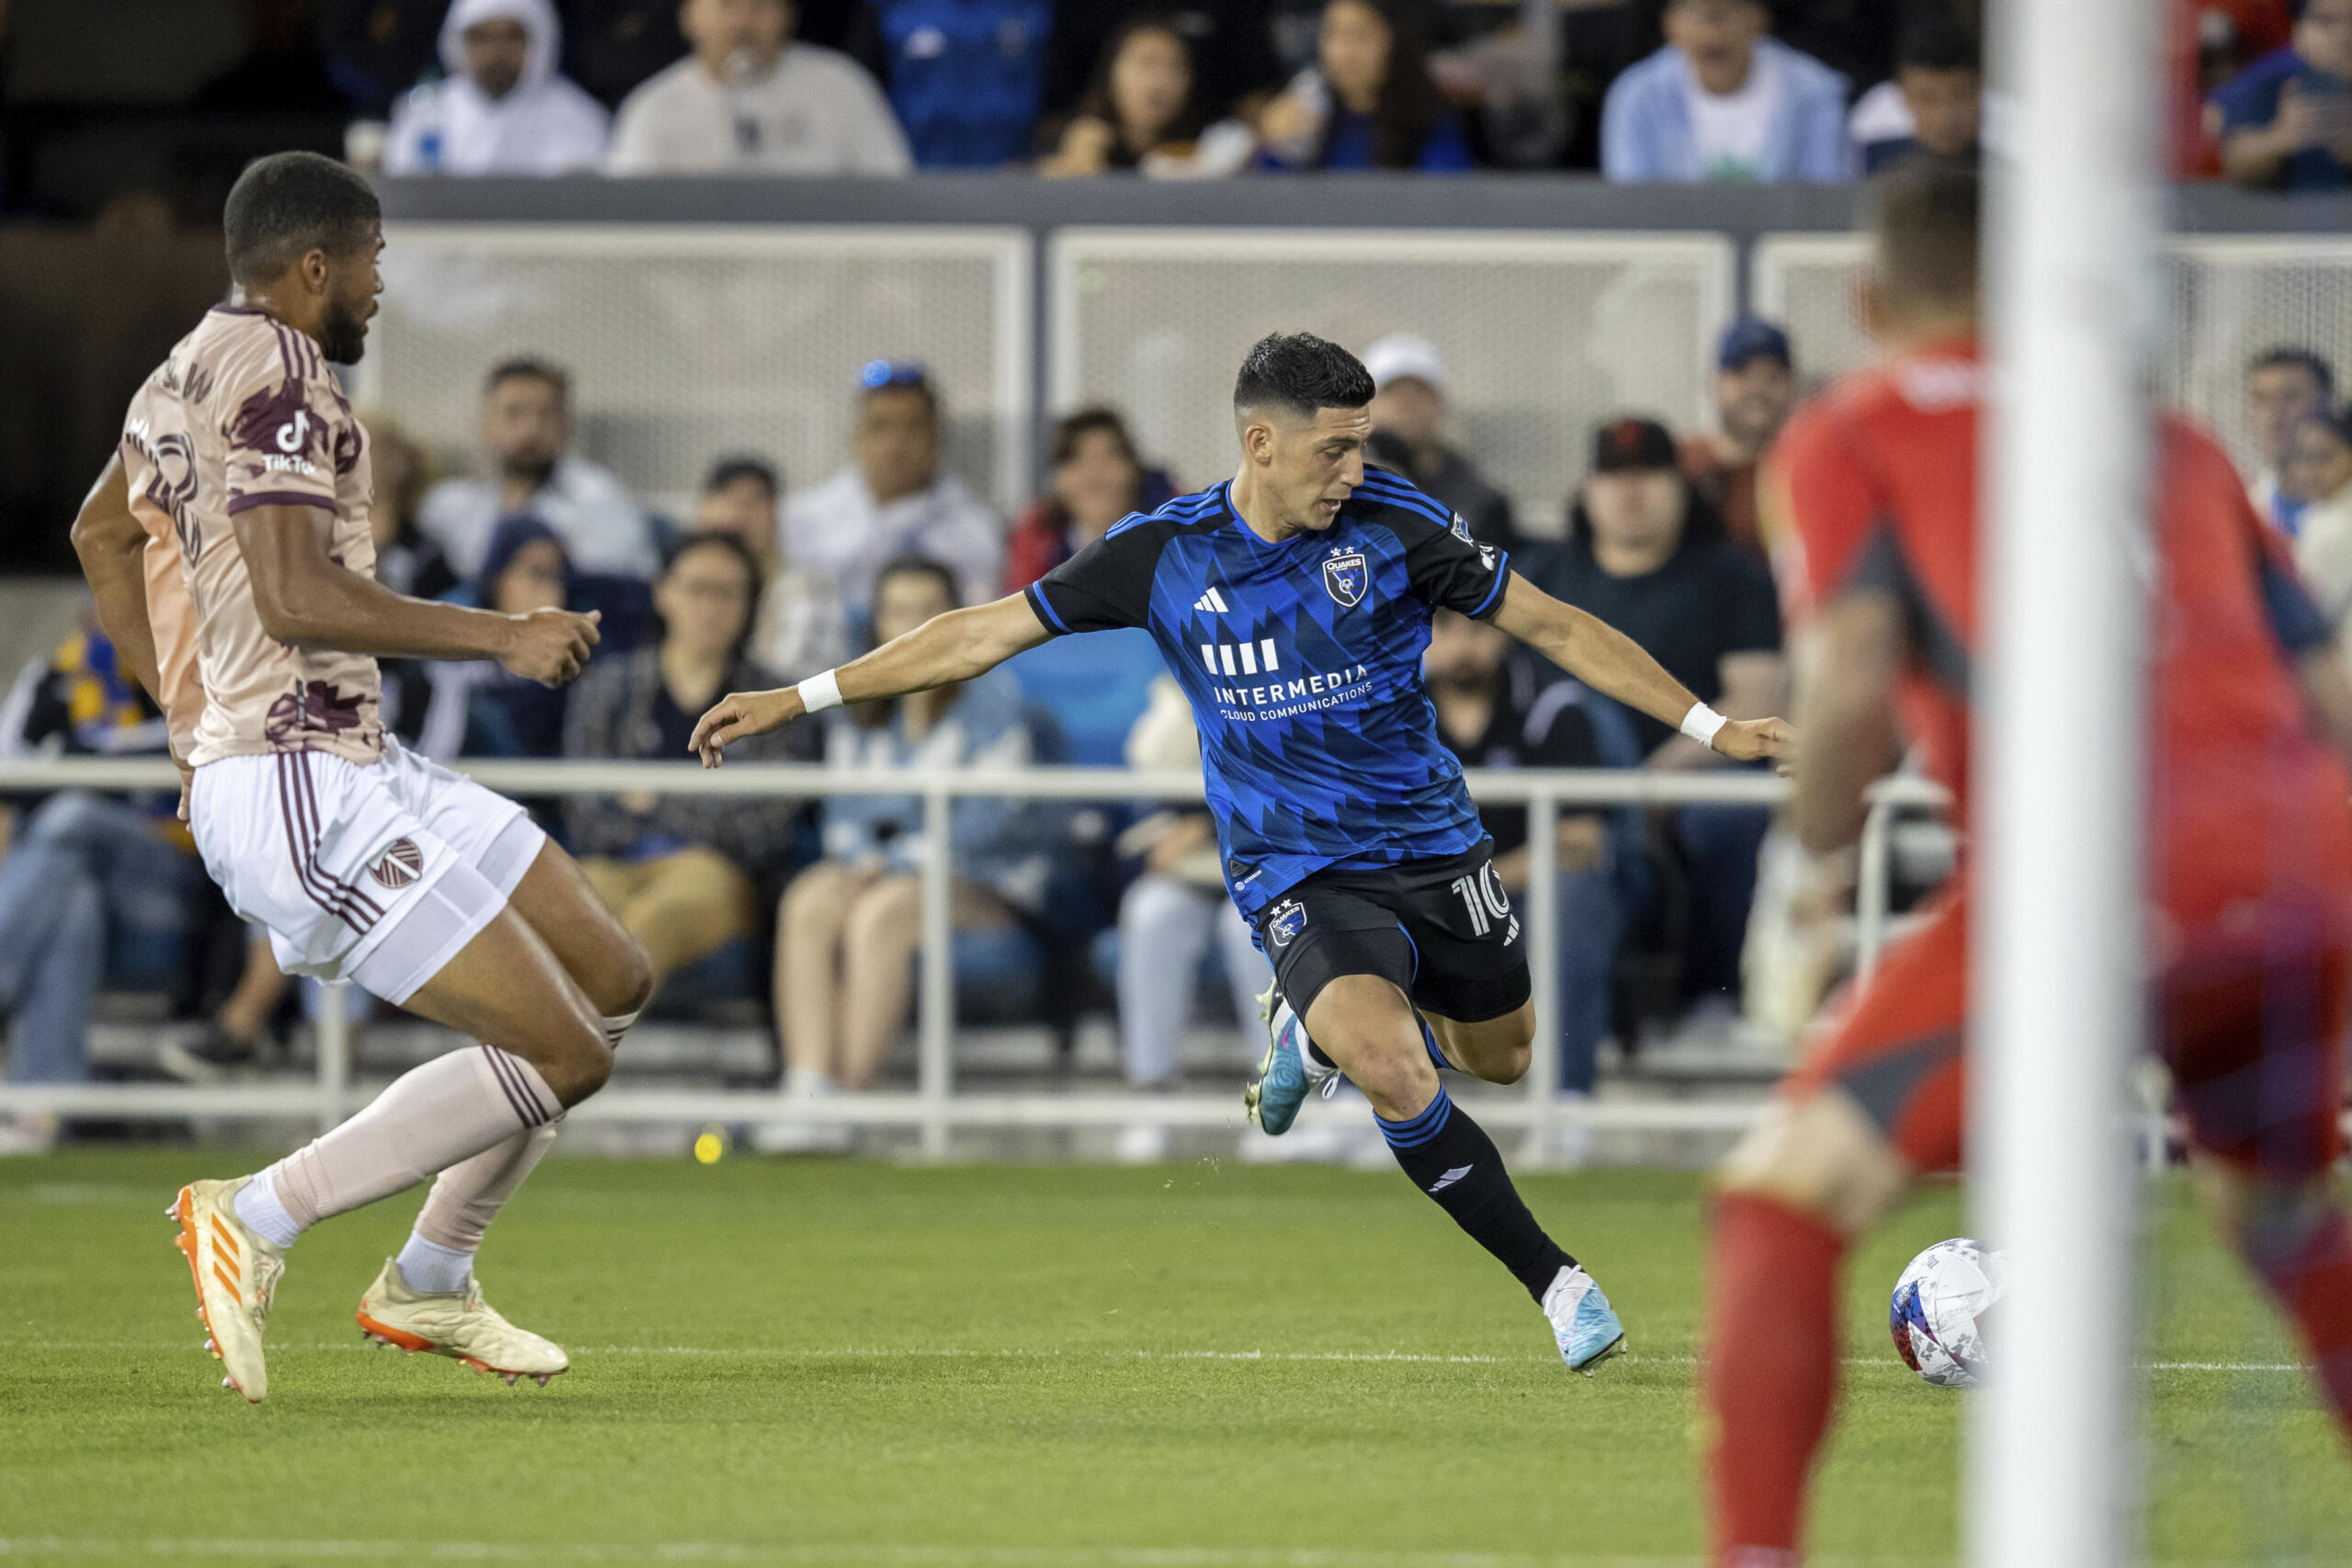 San Jose Earthquakes forward Cristian Espinoza, back right shoots next to Portland Timbers defender Zachery McGraw, left, during the second half of an MLS soccer match in San Jose, Calif., Saturday, June 17, 2023. The game ended in a scoreless draw.